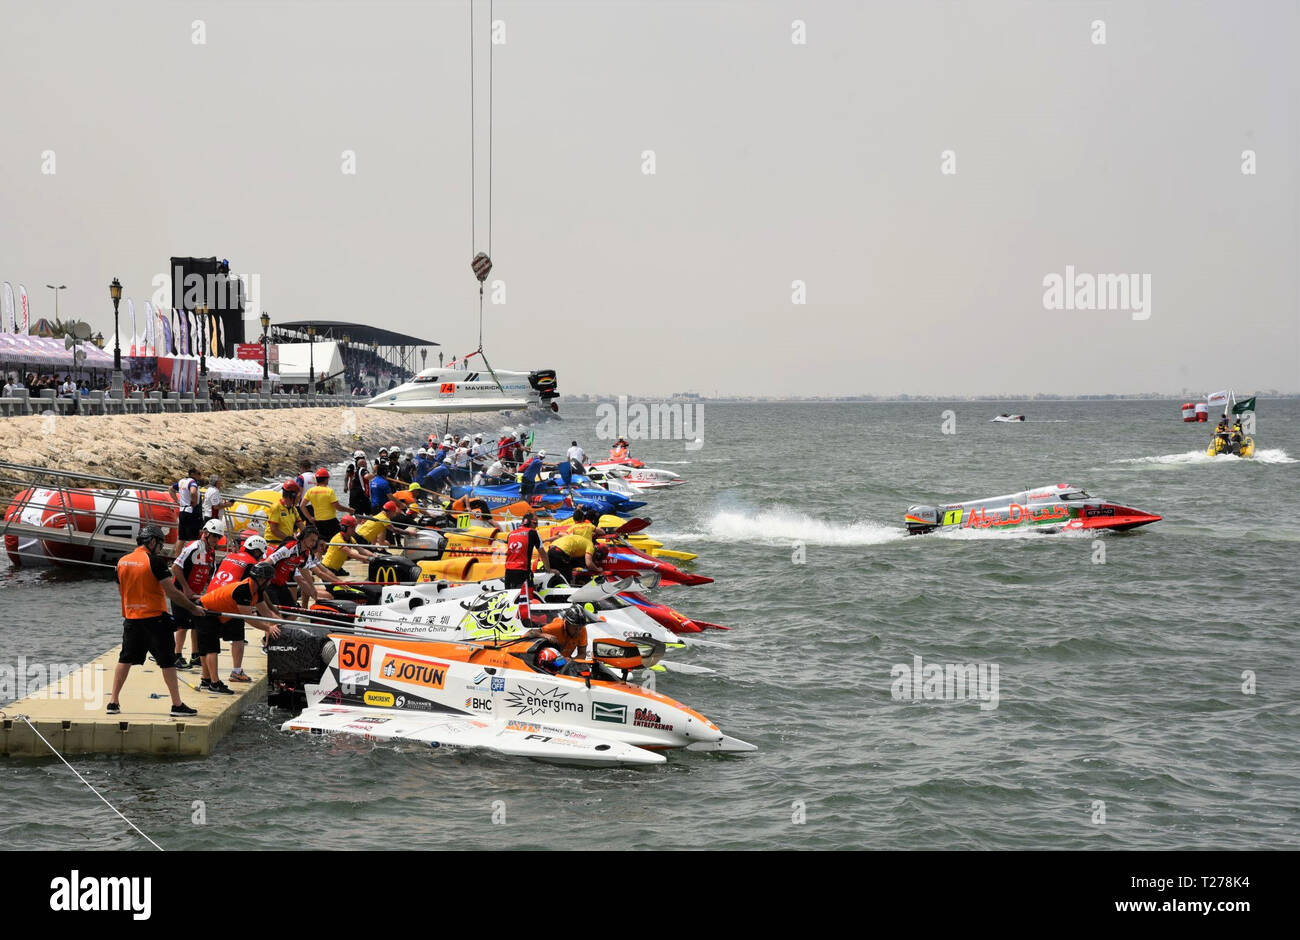 Dammam, Saudi Arabia. 30th Mar, 2019. Powerboats give a brief performance to the audience in Dammam, Saudi Arabia, March 30, 2019. Due to the strong winds and rough seas, officials announced on Saturday the cancellation of the opening round of the UIM Formula 1 World Powerboat Championship (F1H2O) in Dammam. Credit: Tu Yifan/Xinhua/Alamy Live News Stock Photo